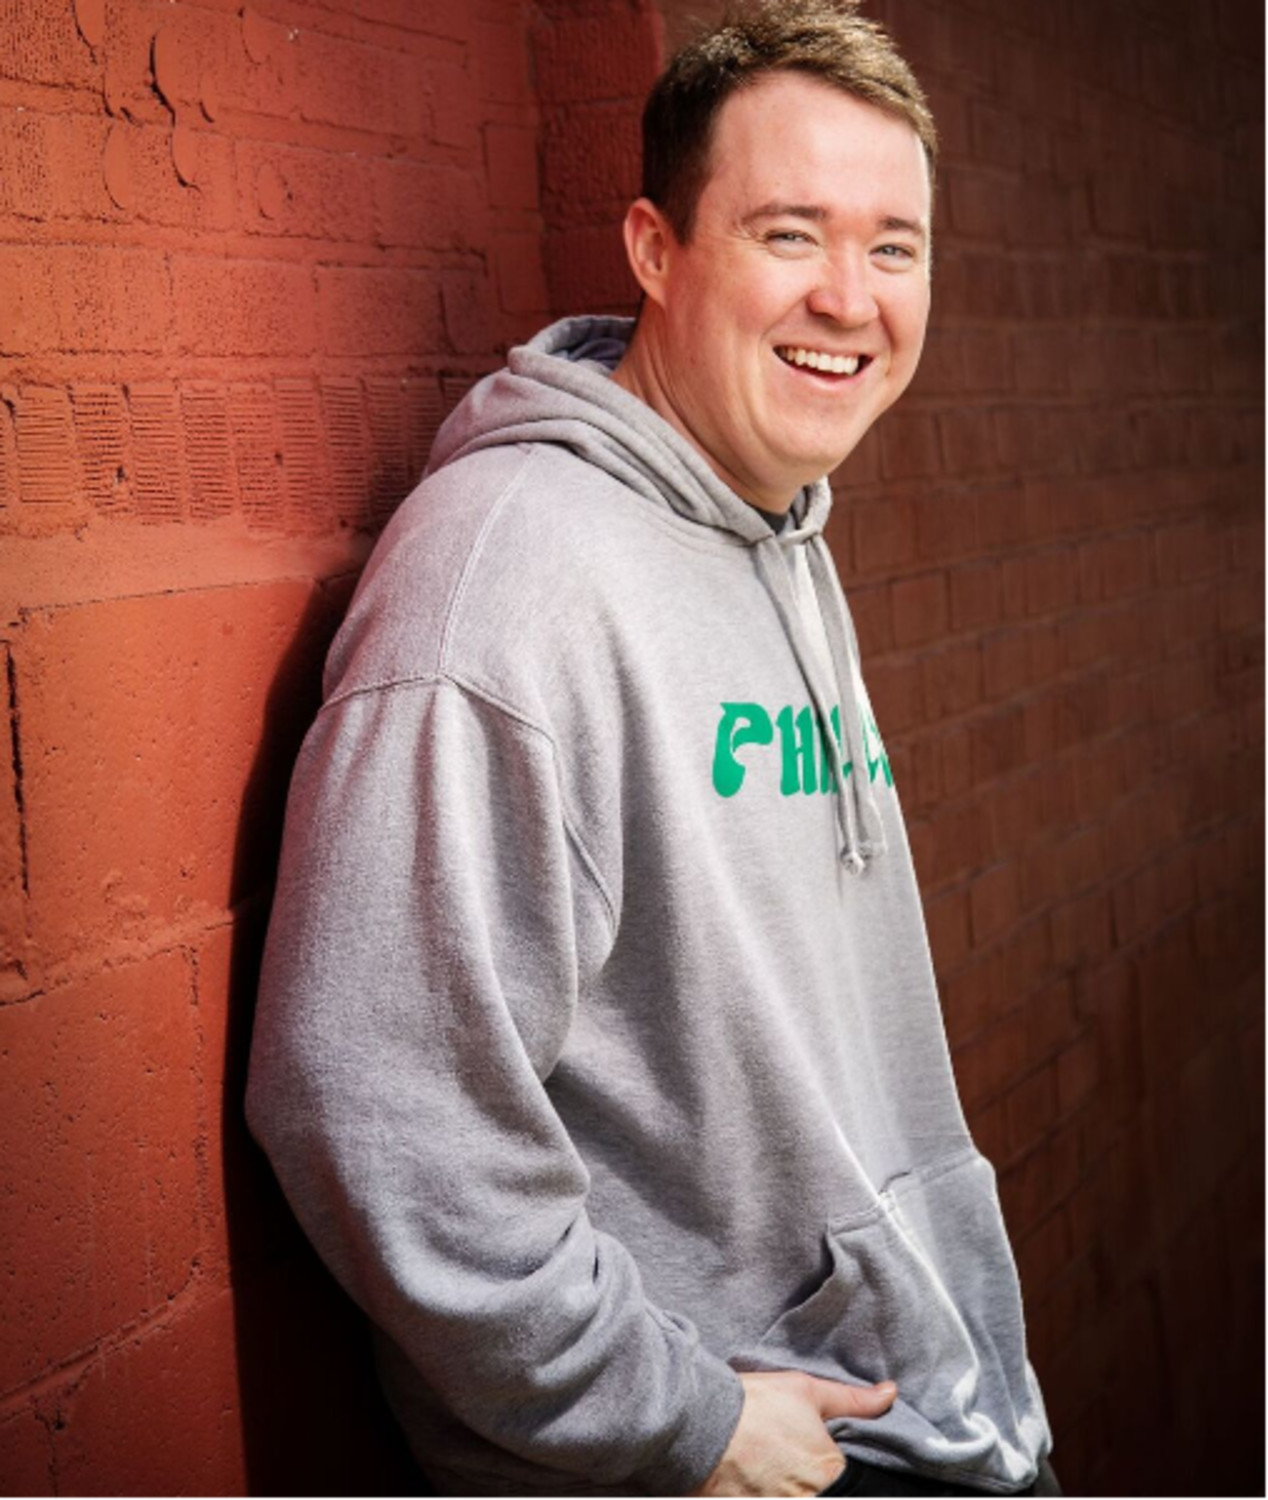 Shane Gillis from Comedy Central & More Providence Media